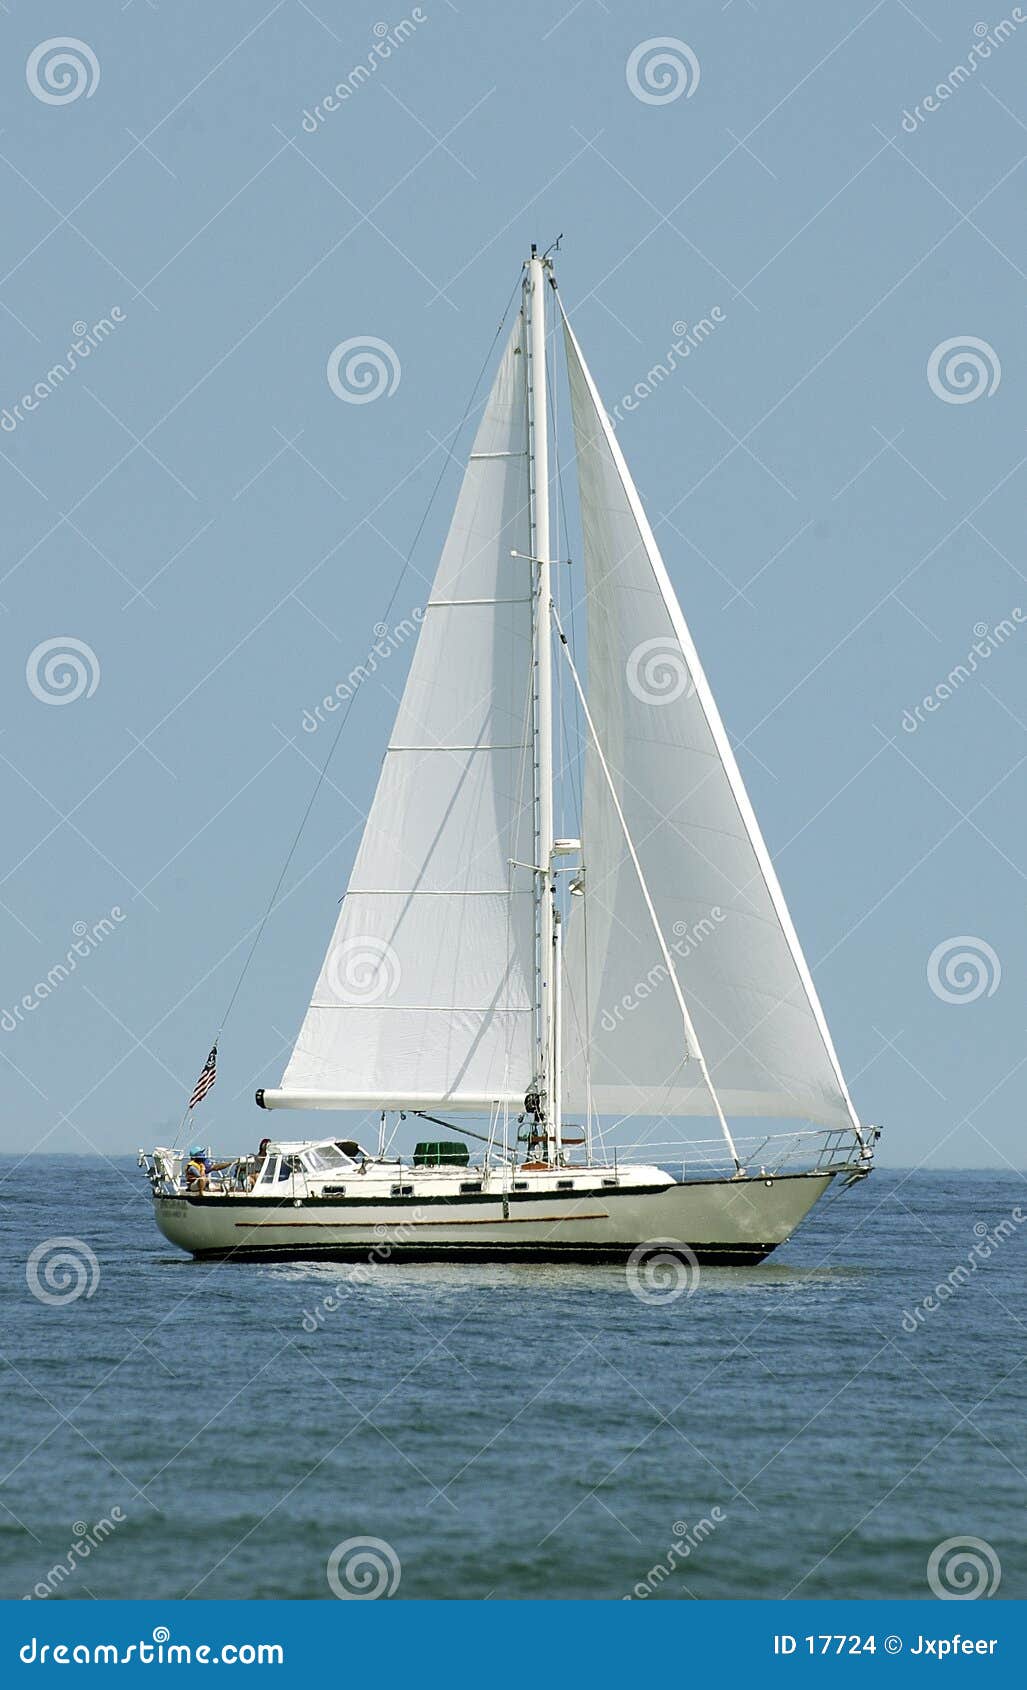 Boat On Water - Vertical Stock Images - Image: 17724